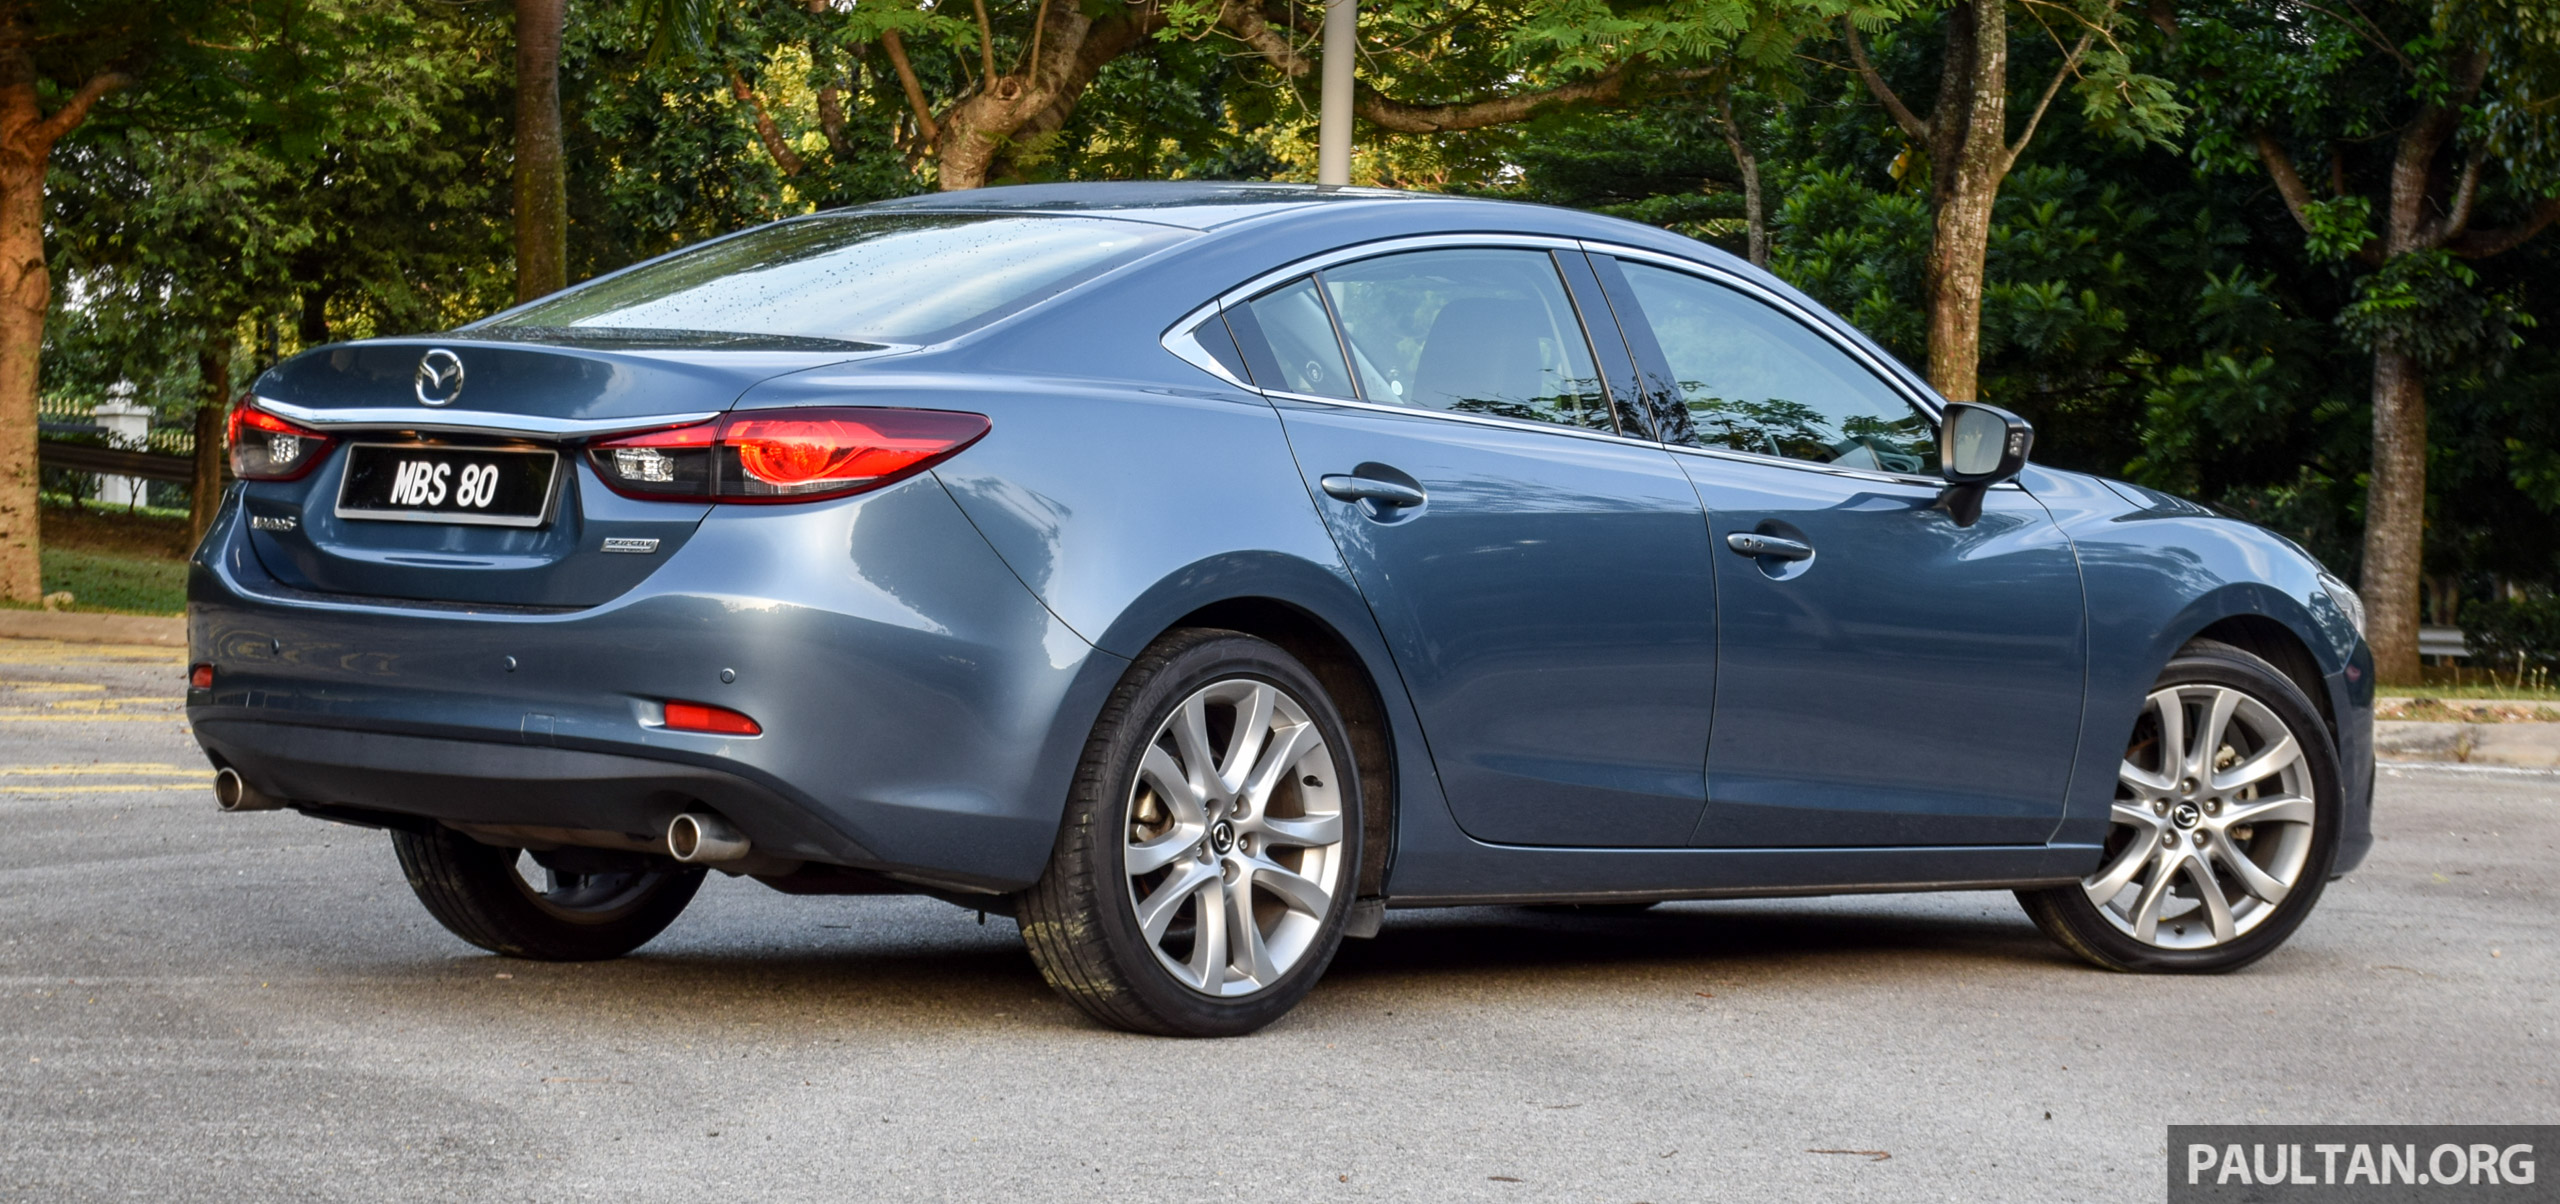 DRIVEN Mazda 6 2.2L SkyActivD what to expect from the